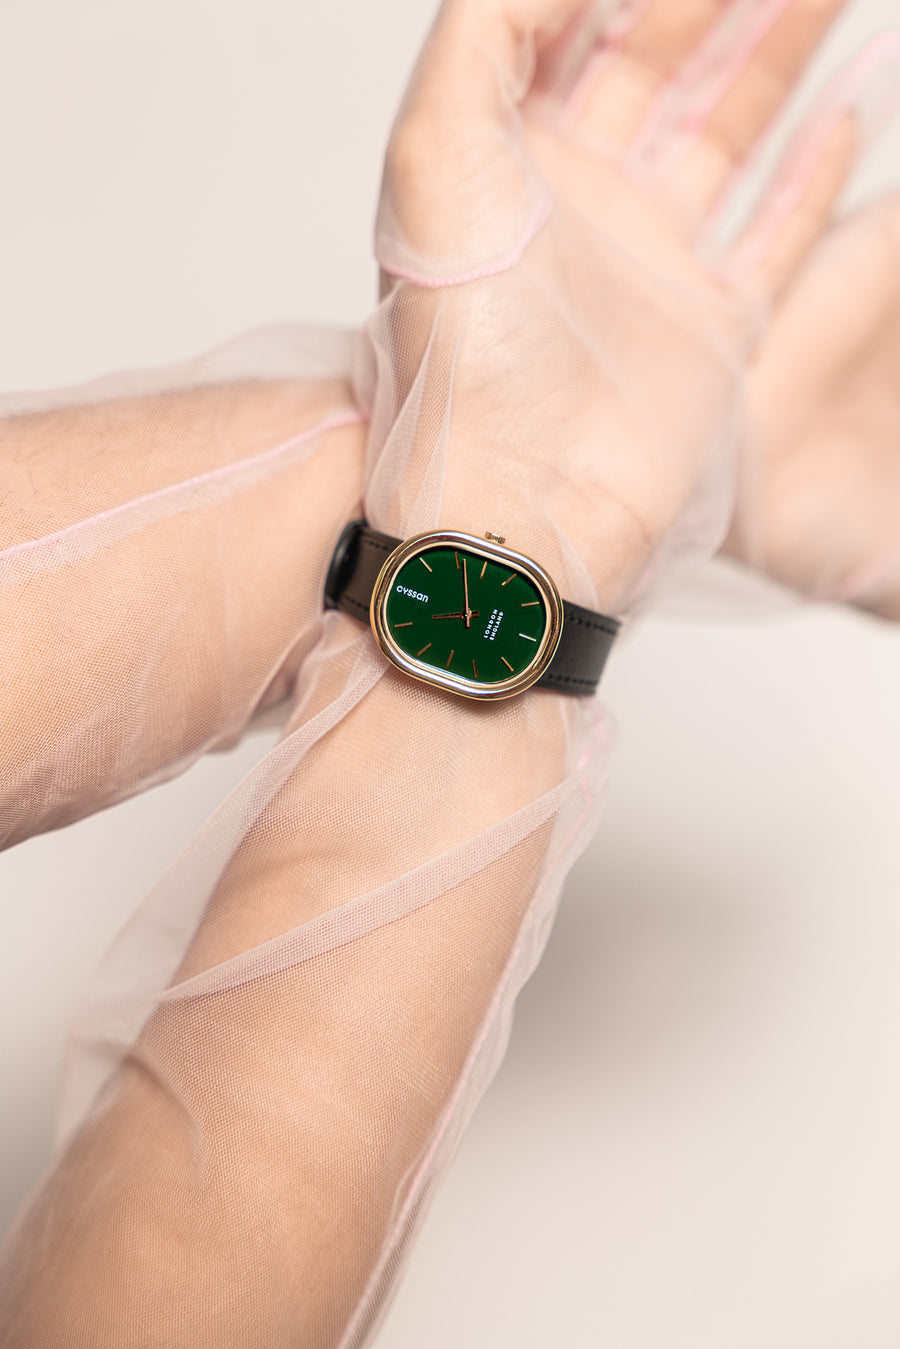 A close-up of a woman's arms and hands, She's wearing long, sheer-pink tulle gloves and a watch with a gold case, green dial and black strap